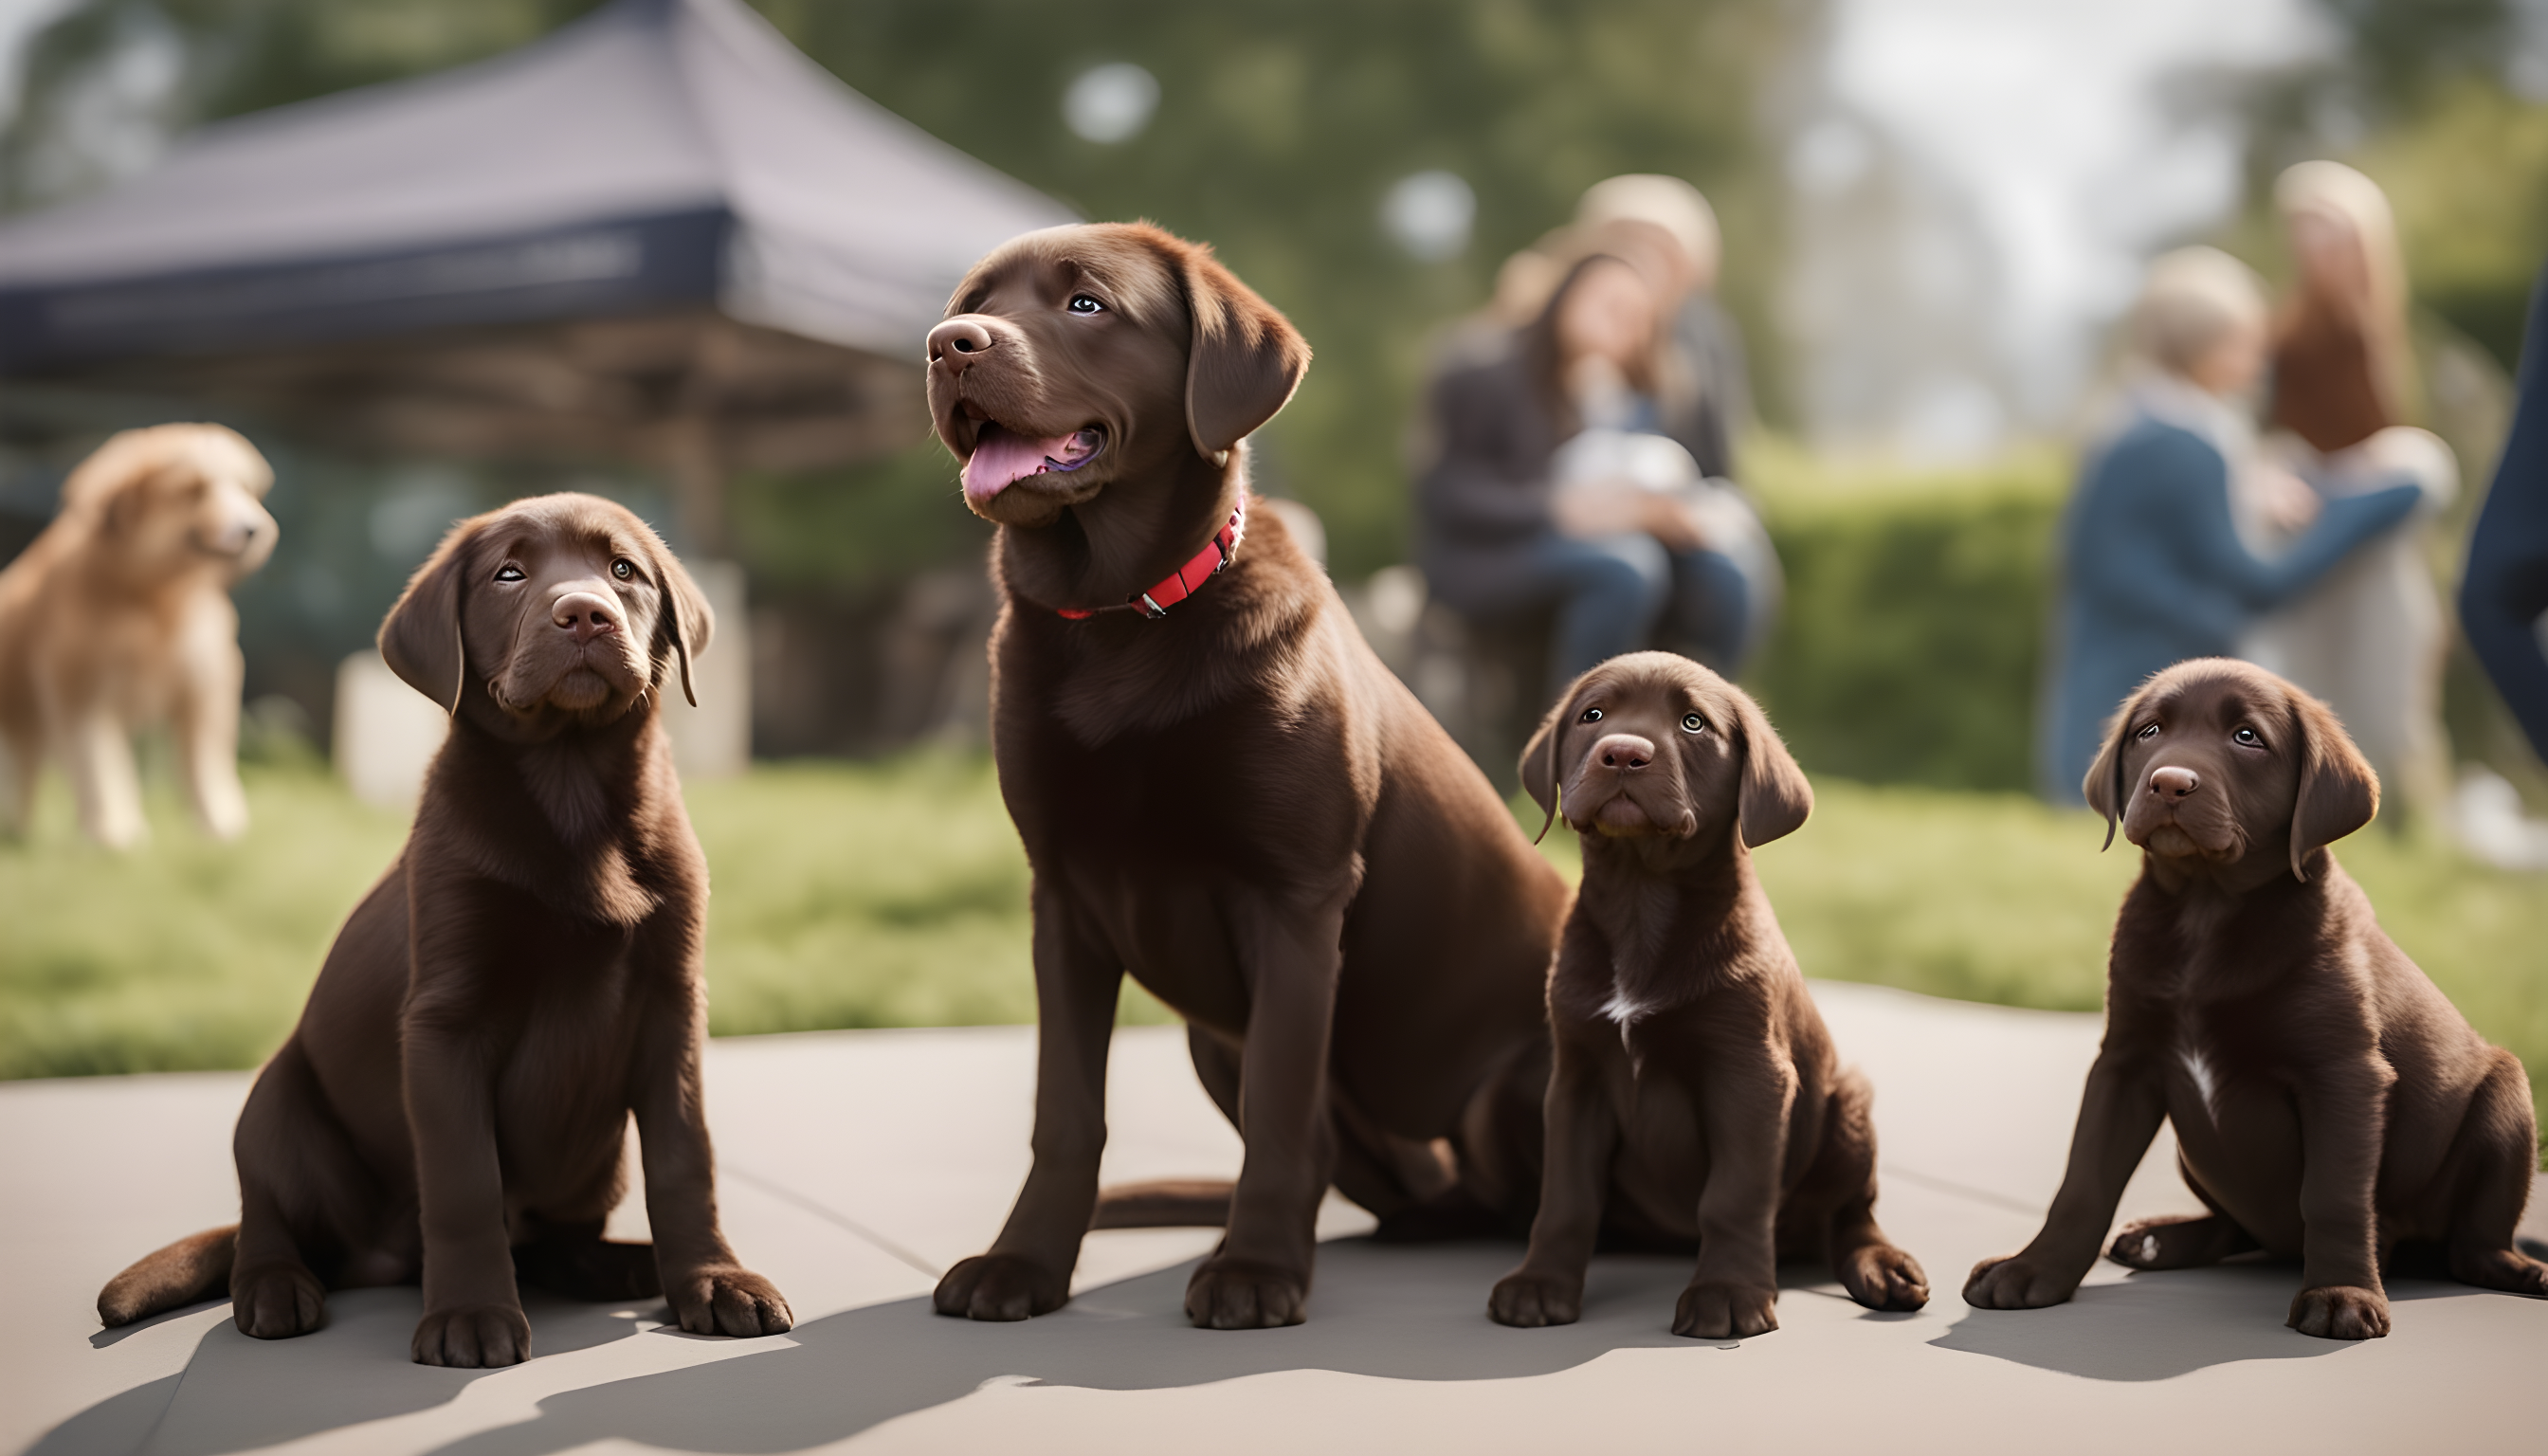 A joyful meet-and-greet featuring chocolate lab puppies near me and their owners, emphasizing how local events can build a strong sense of community and support